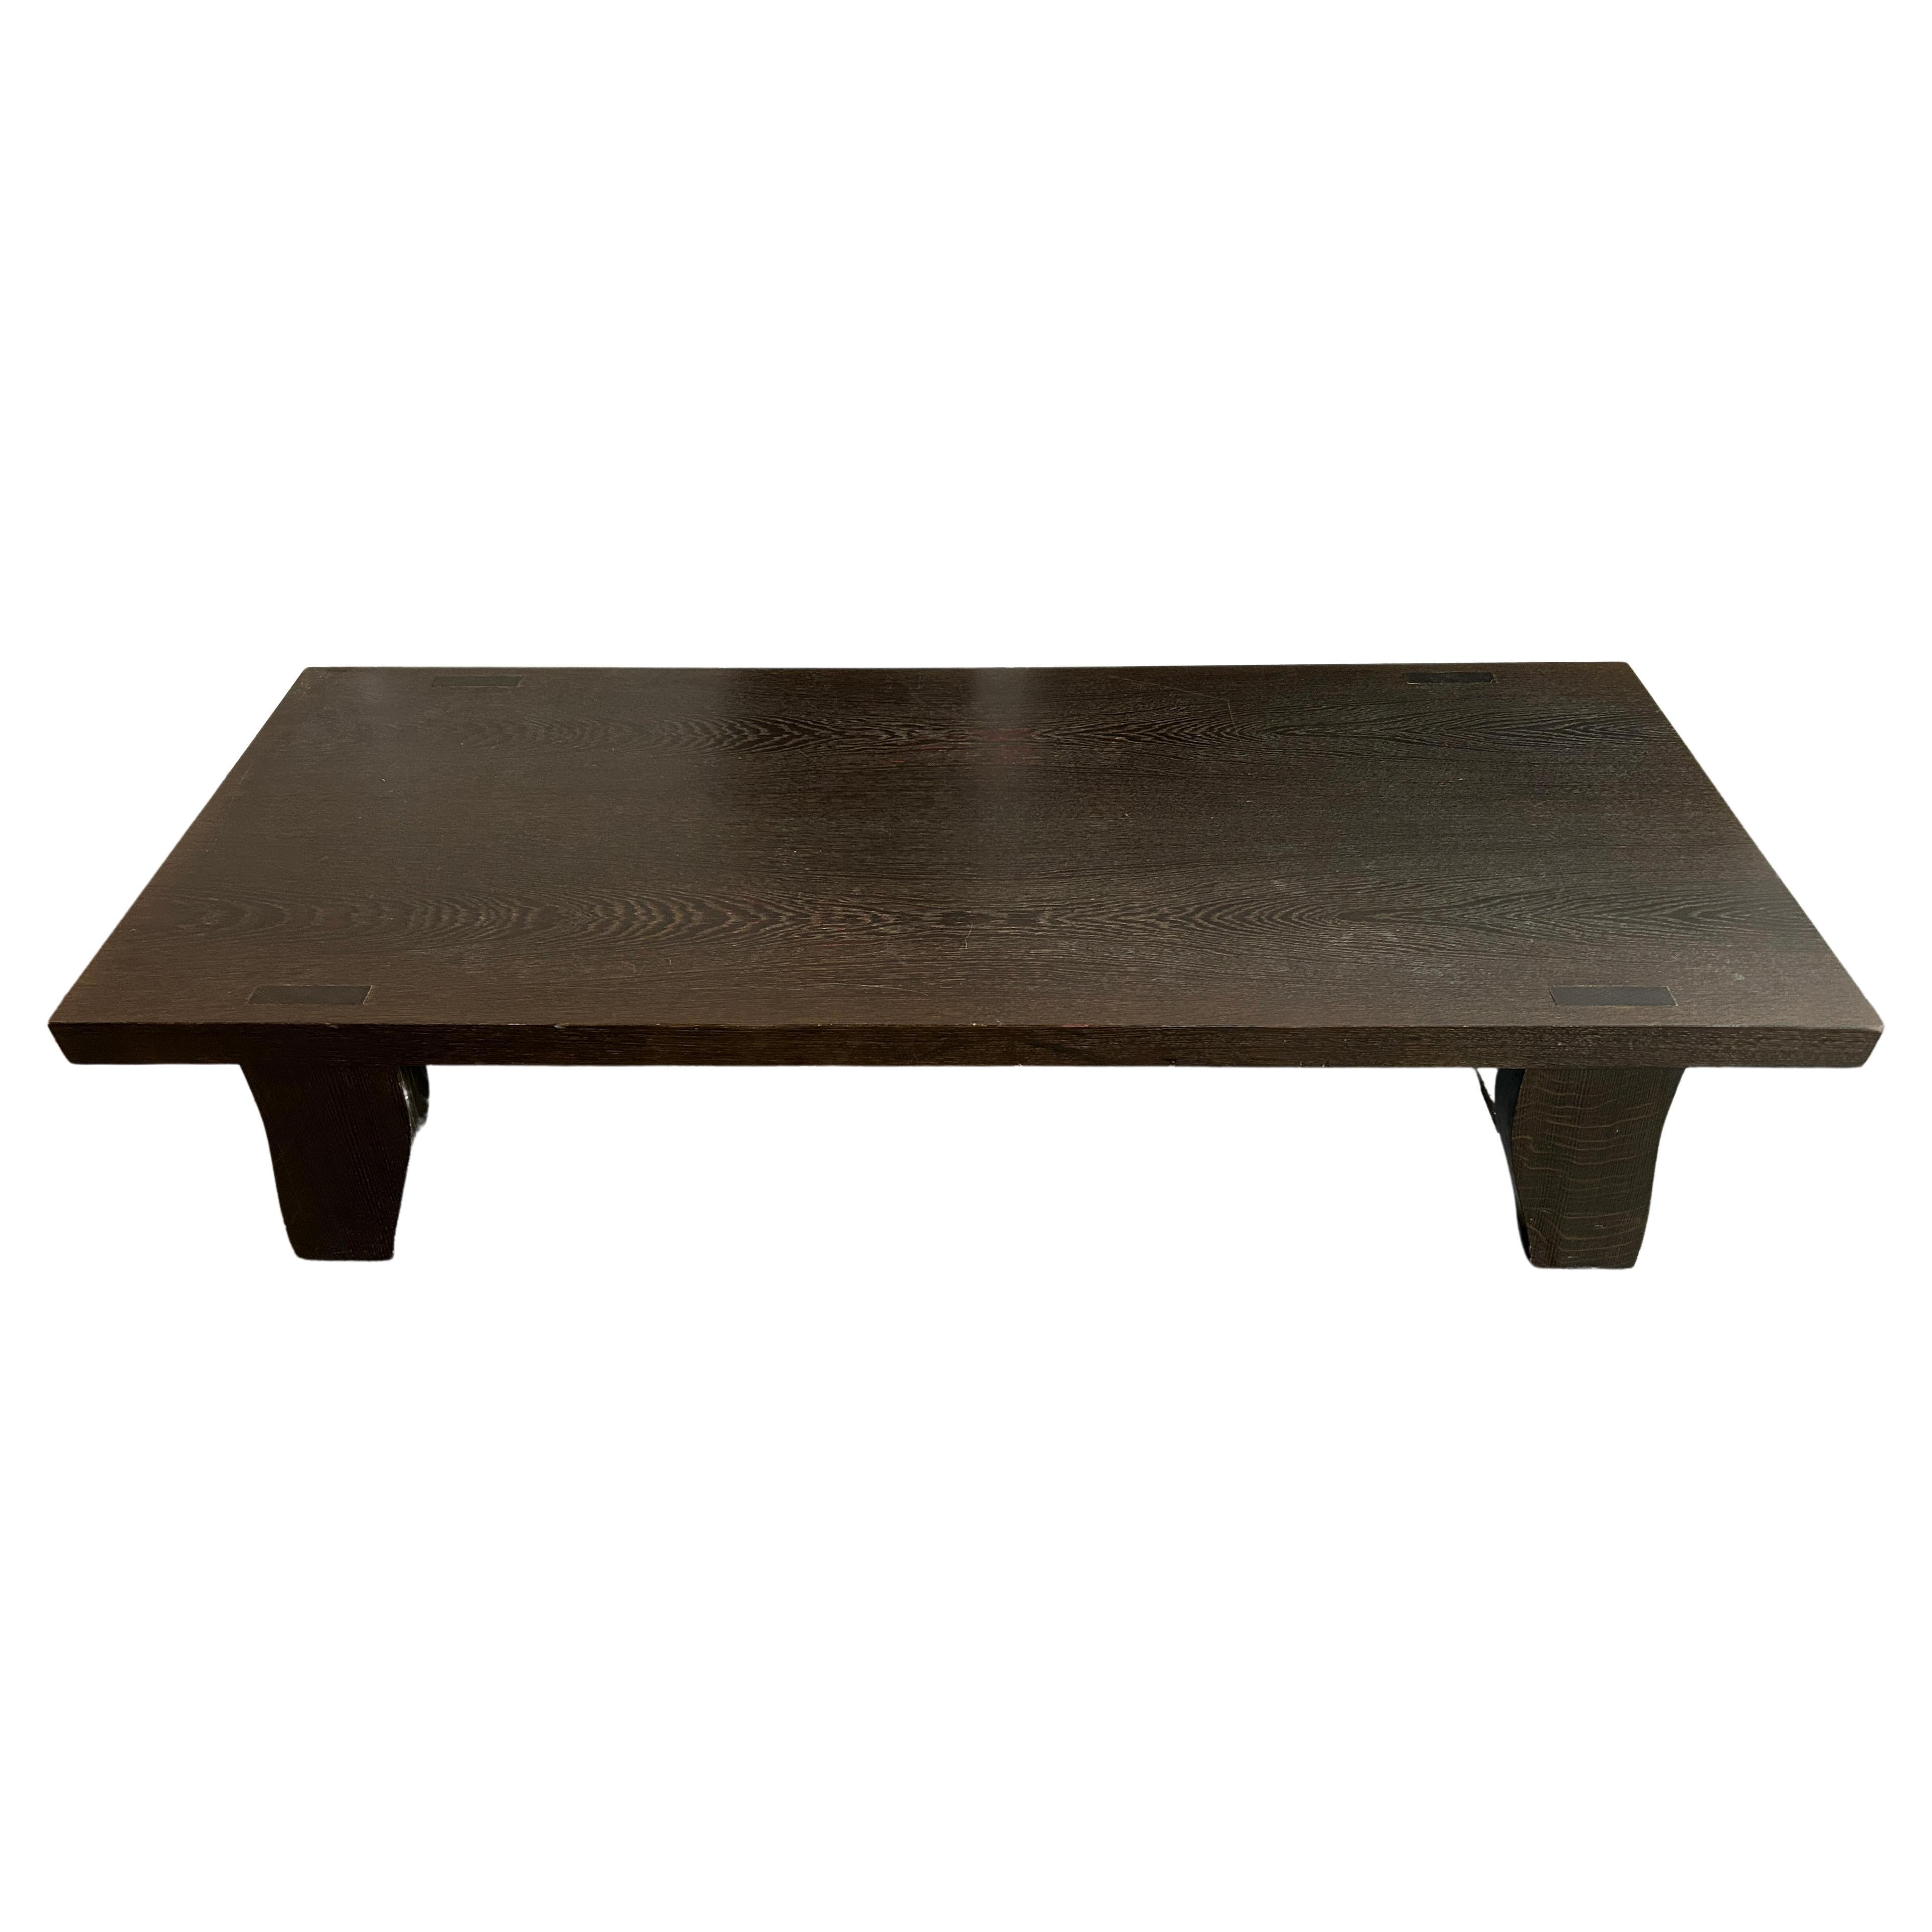 Beautiful Philippe Hurel solid large low white oak coffee table dark brown finish, made in France. Great grain and details very solid and heavy. Great design. Stamped labeled under table.

Measures: 71